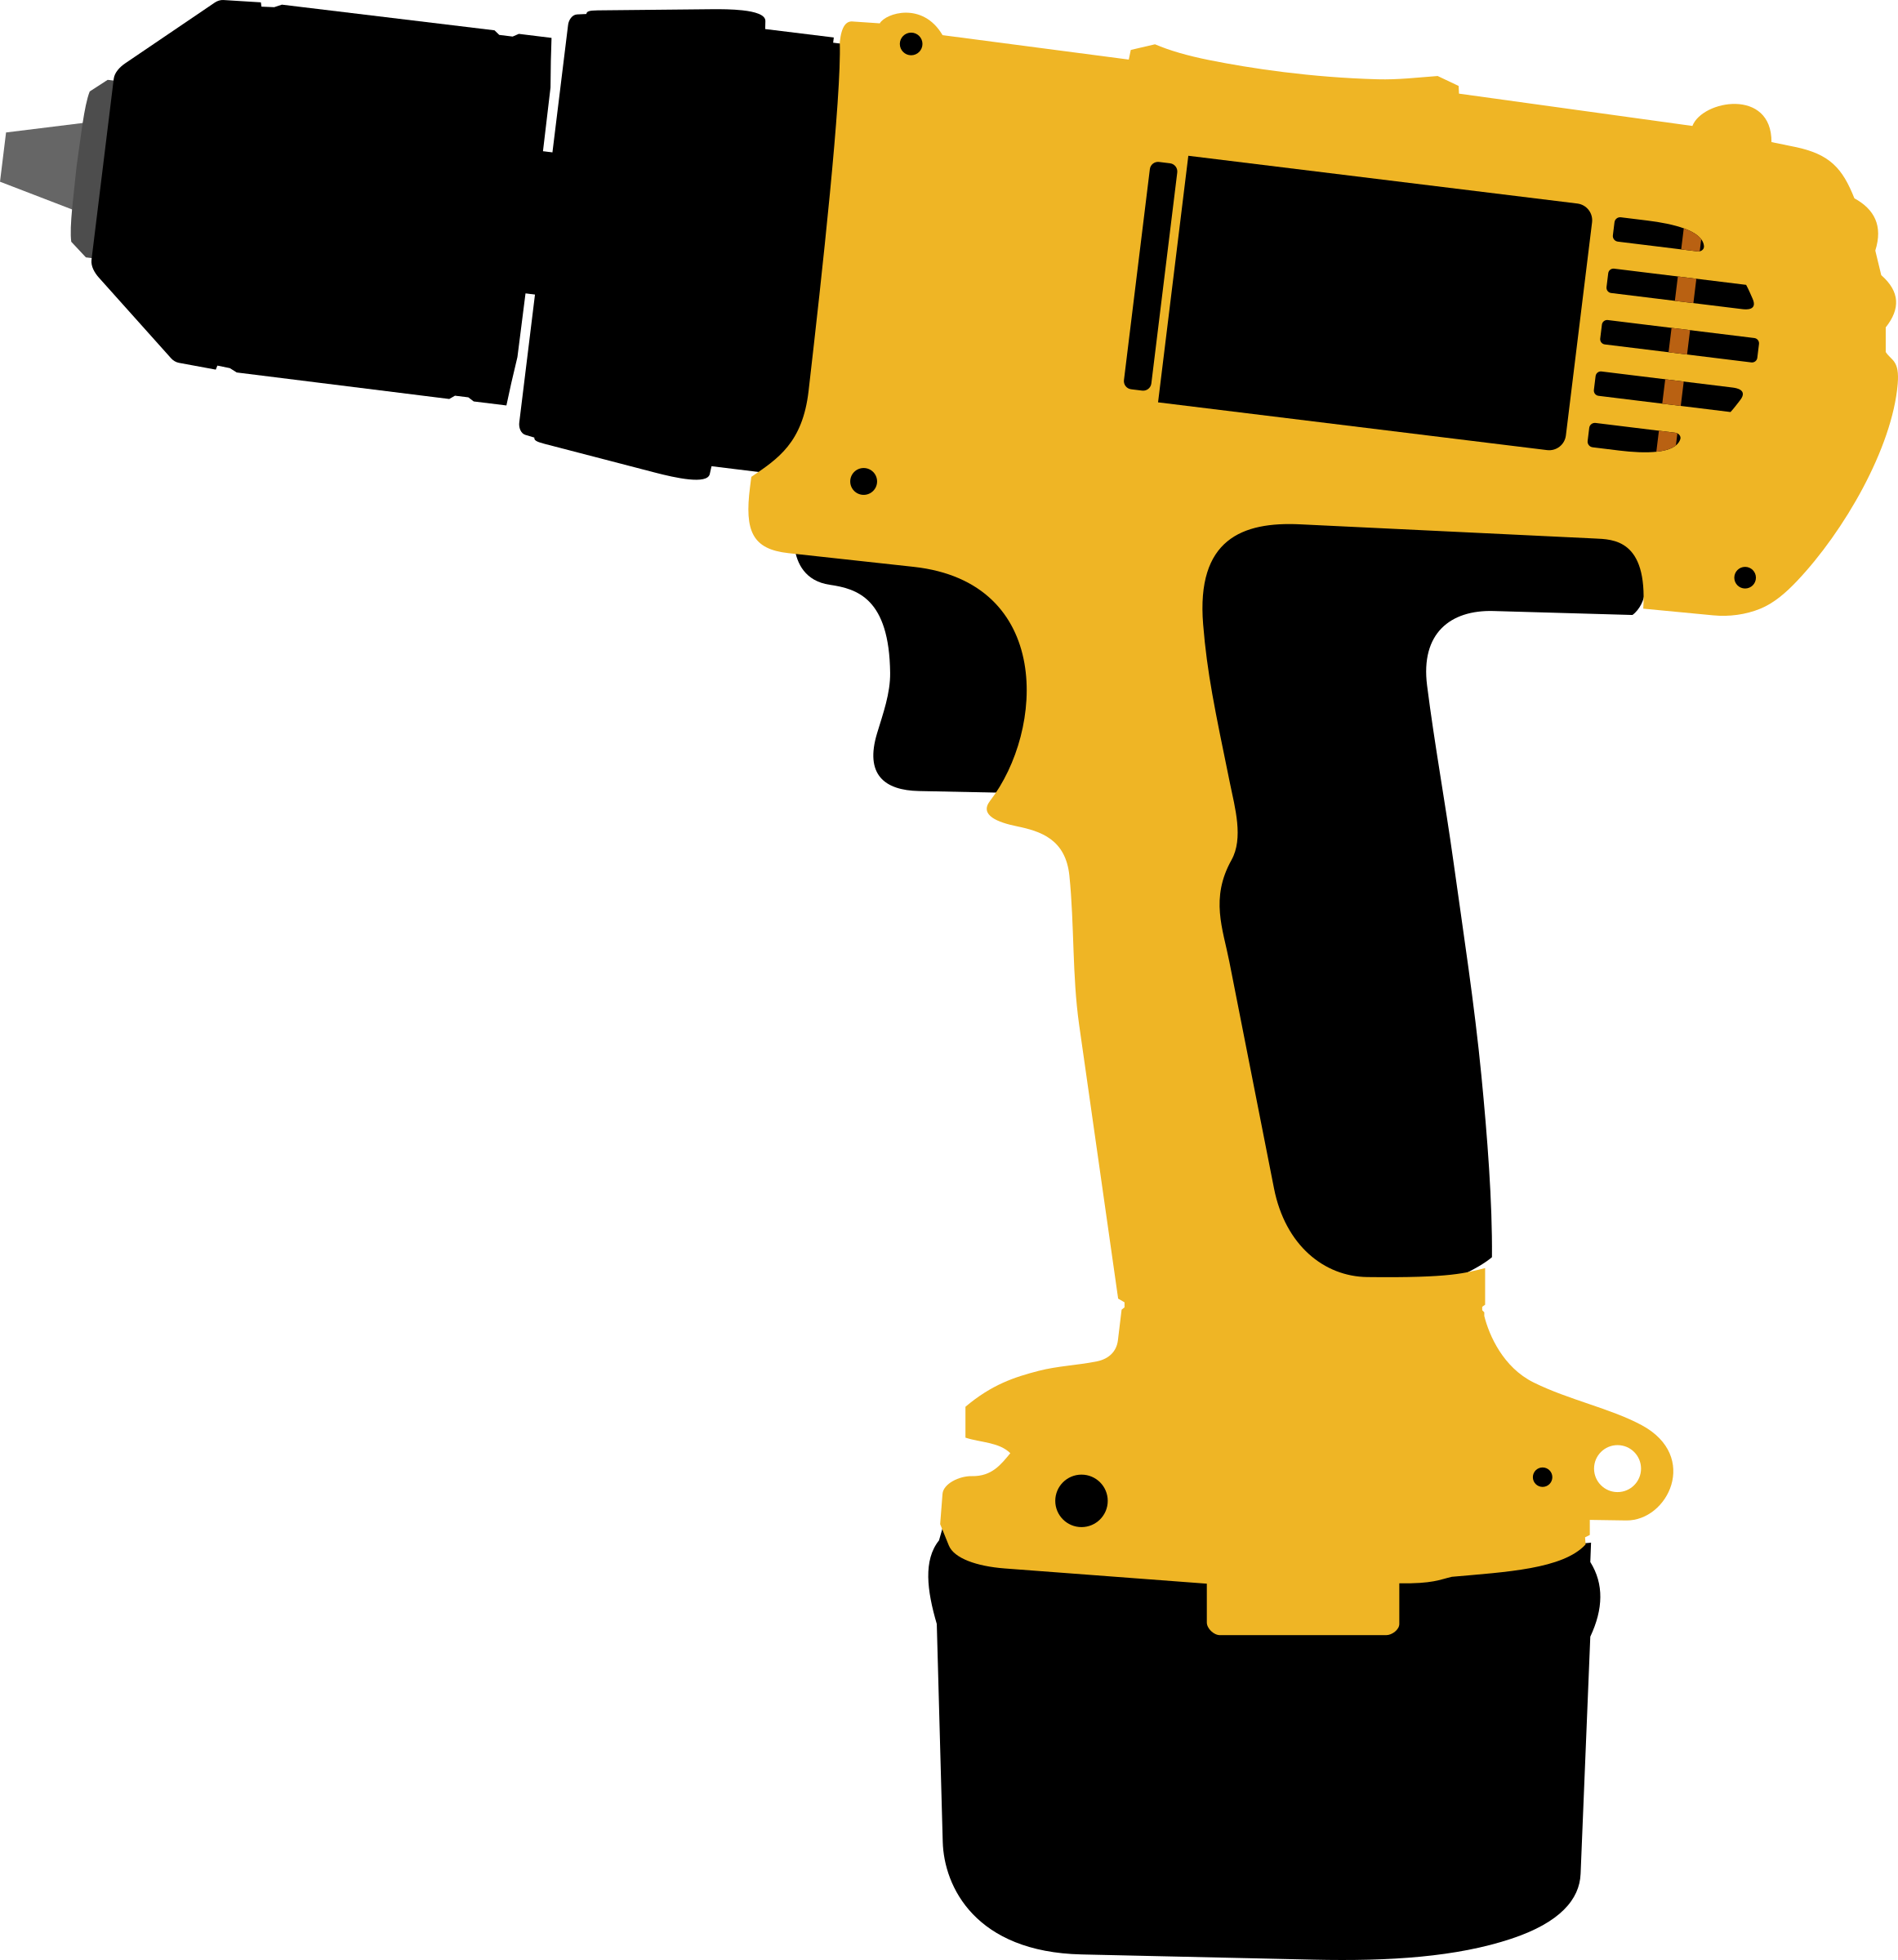 tool clipart screw driver